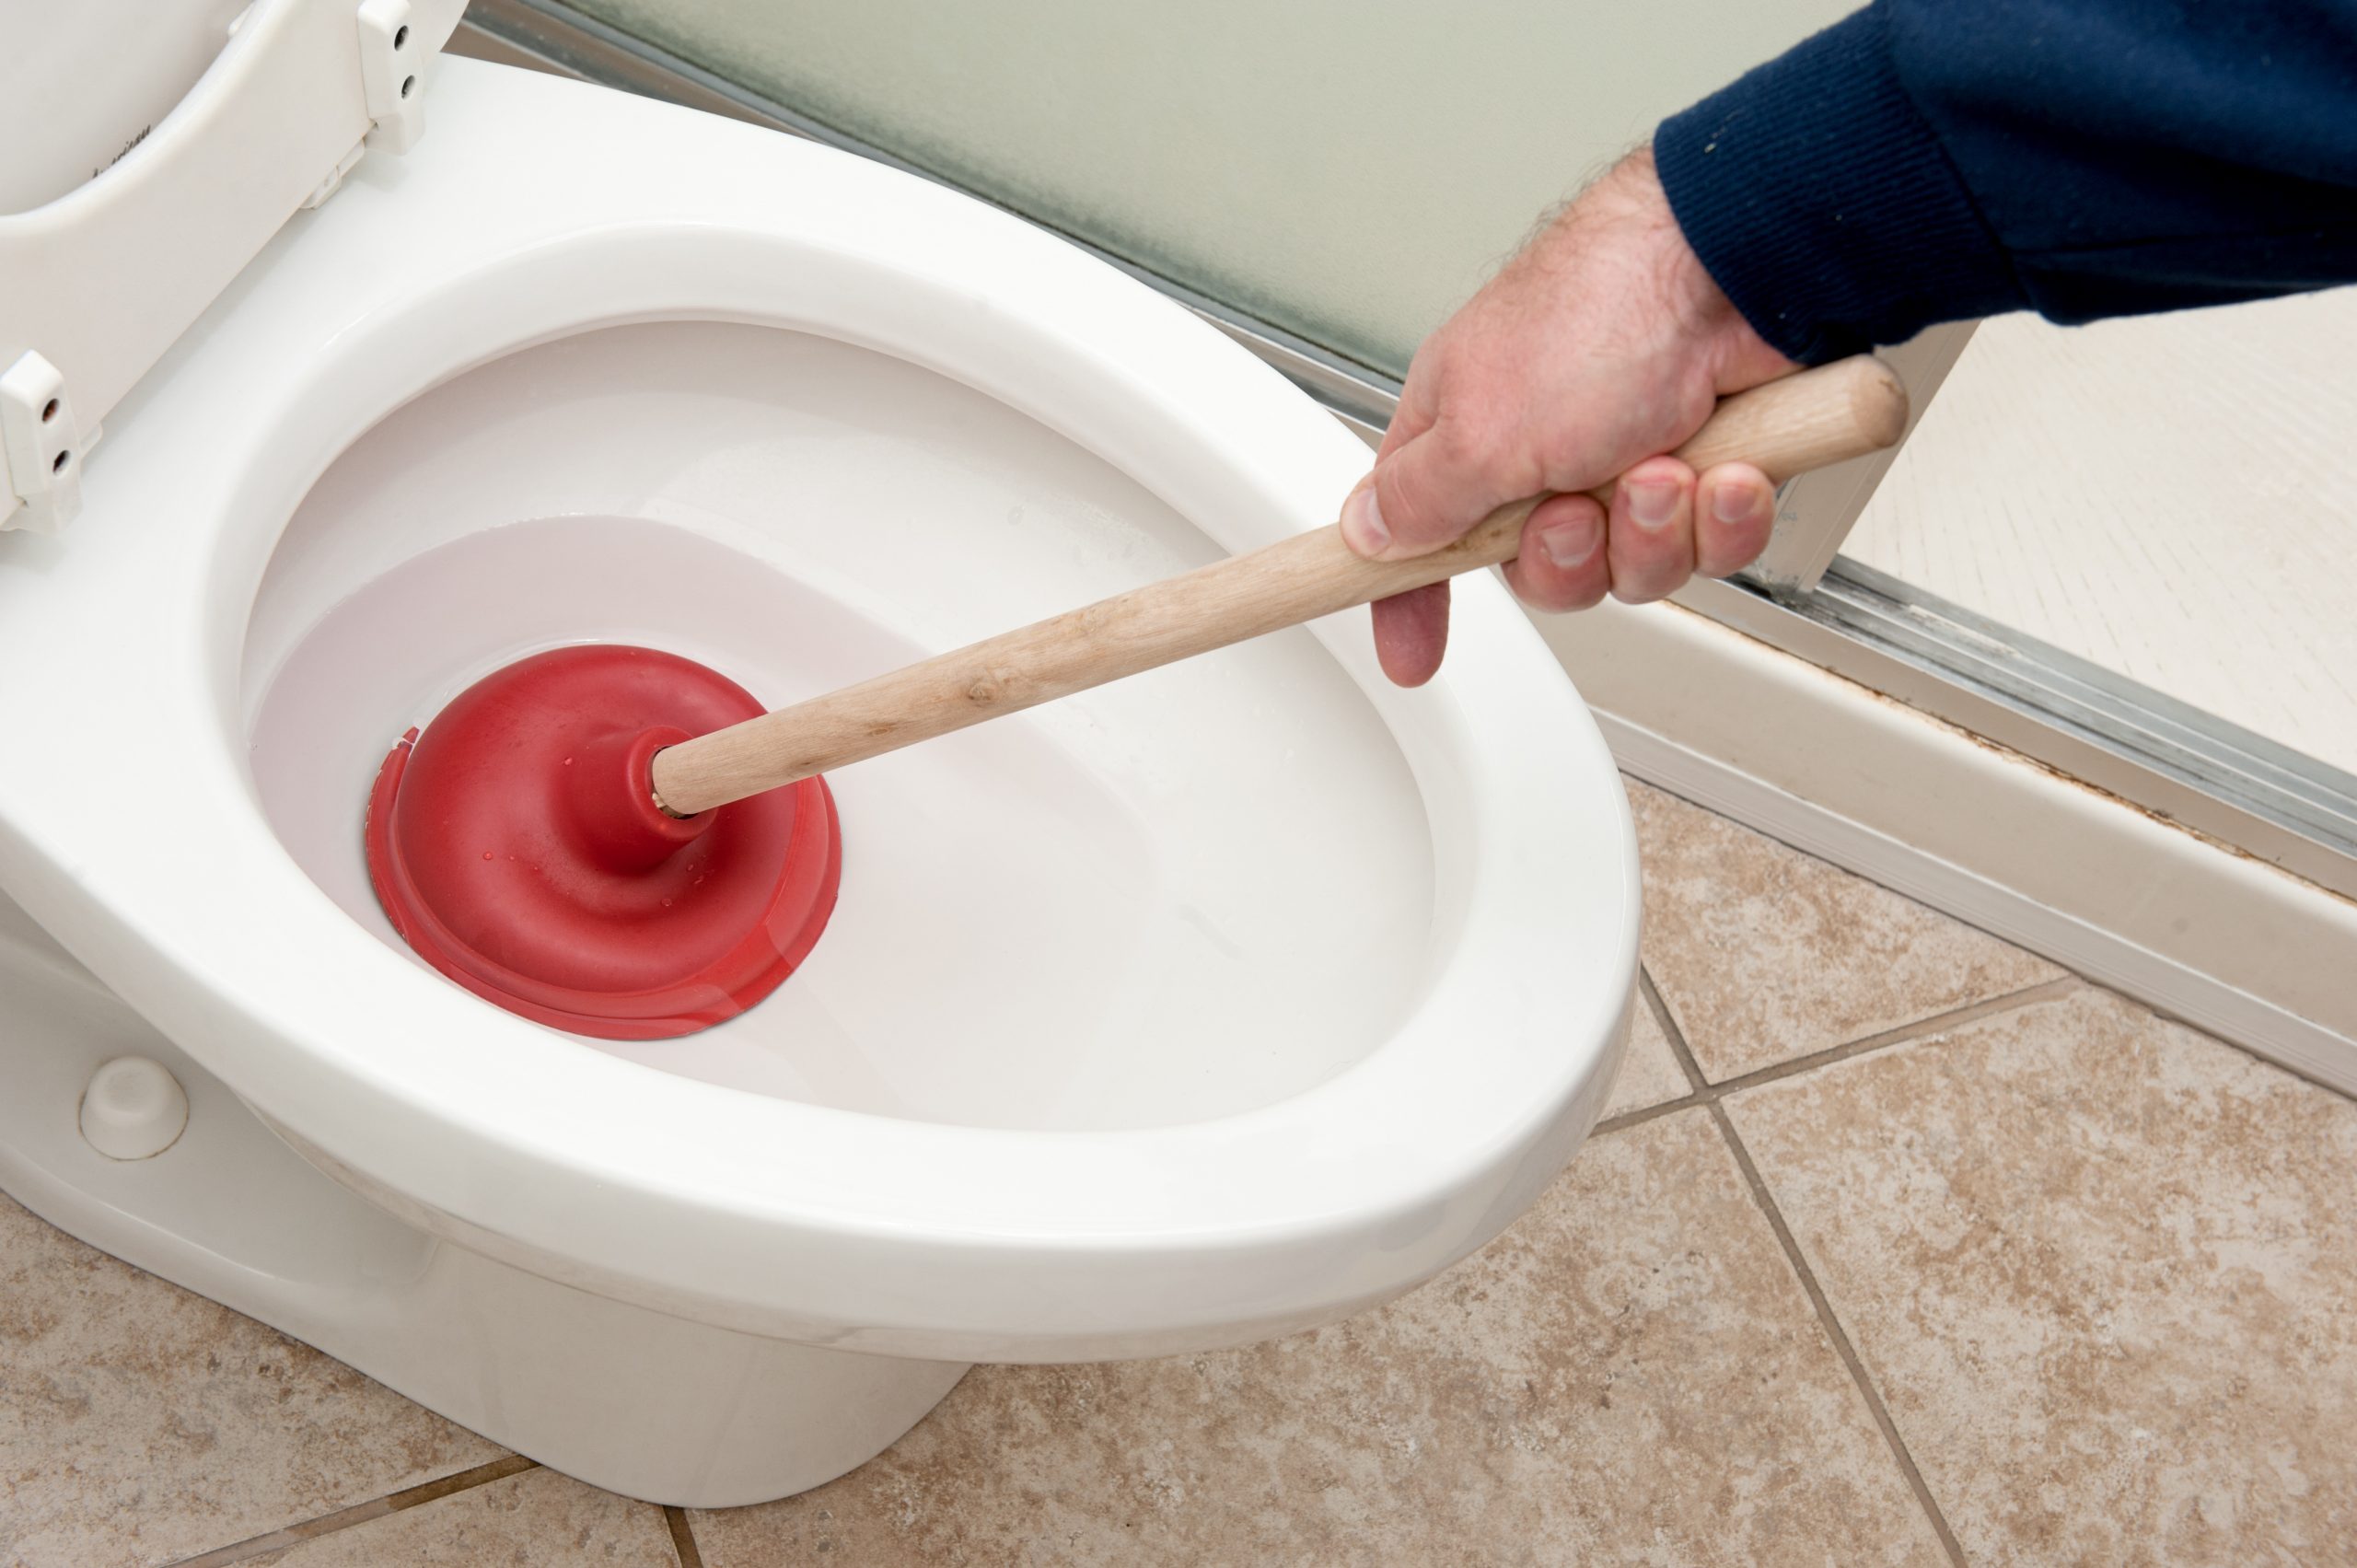 plunger used to unclog toilet